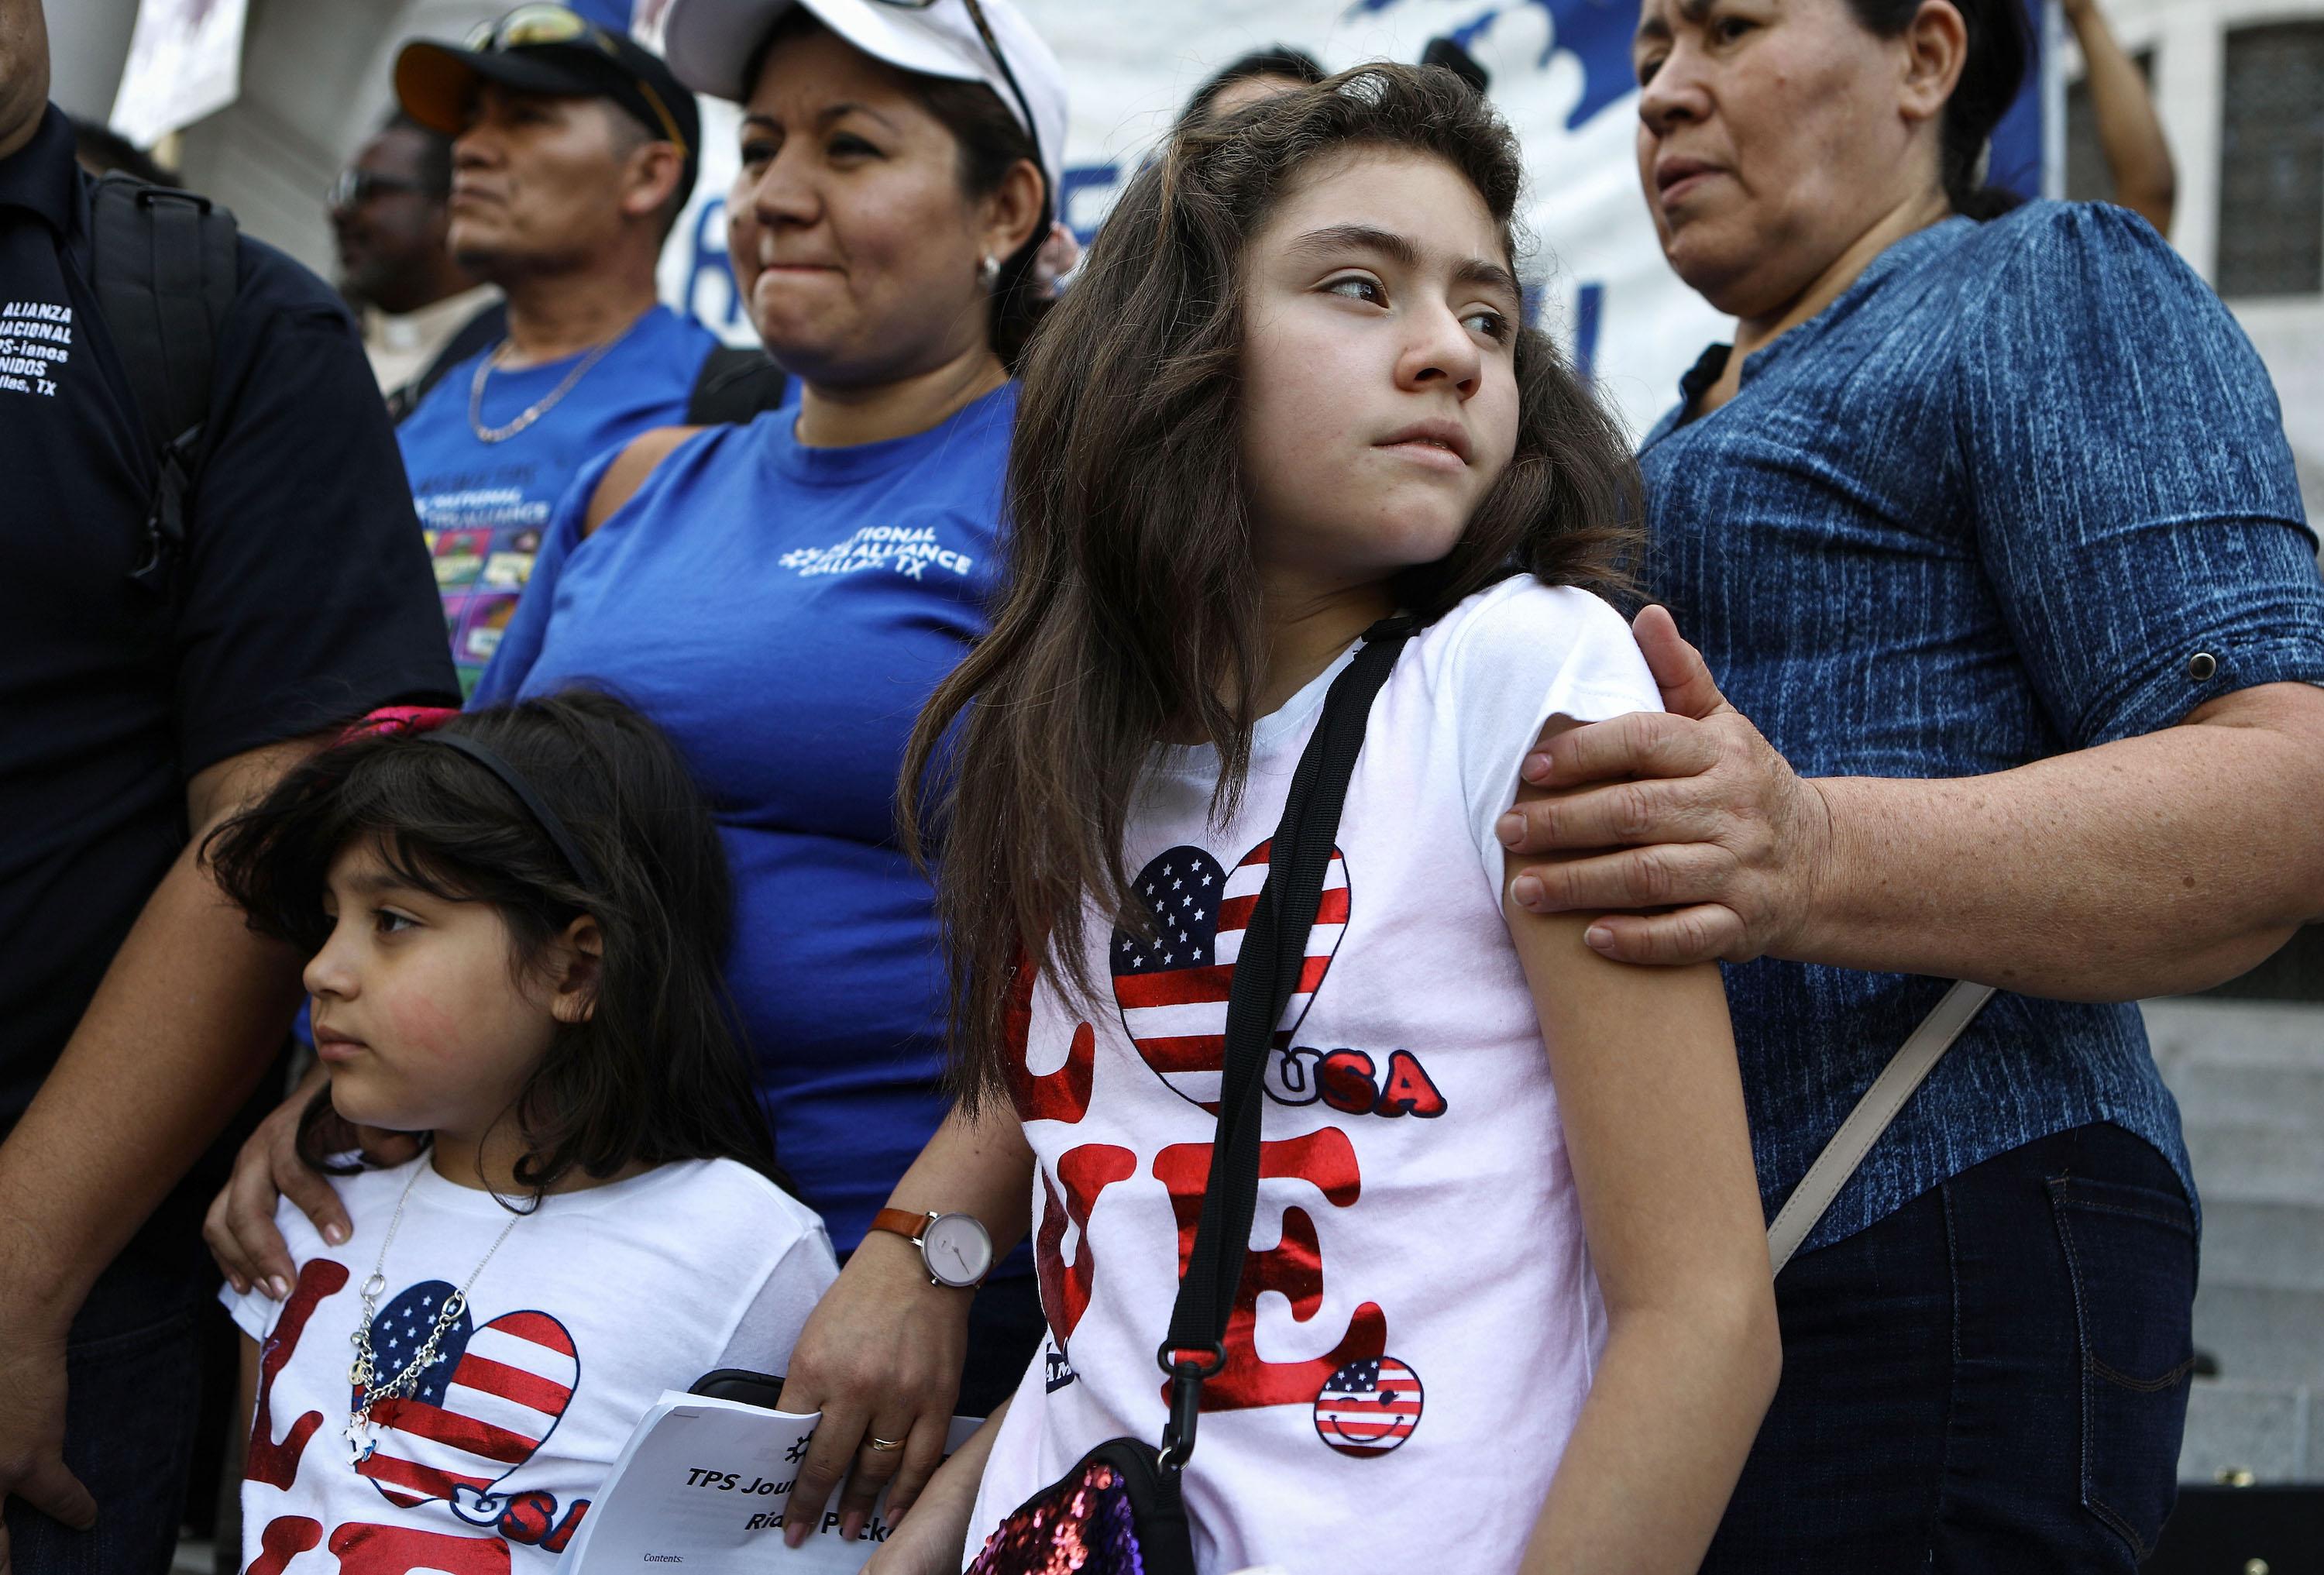 Mother Mily Rivas (top center left), a TPS recipient from El Salvador, stands with her daughters Suri and Ariely Murrilo, both U.S. citizens, at the launch of the TPS Journey for Justice Caravan outside City Hall on August 17, 2018, in Los Angeles, California. Mily faced deportation with the termination of the TPS program for Salvadorans. The caravan traveled from Los Angeles to Washington, DC, with more than 50 TPS holders to protest the Trump administration